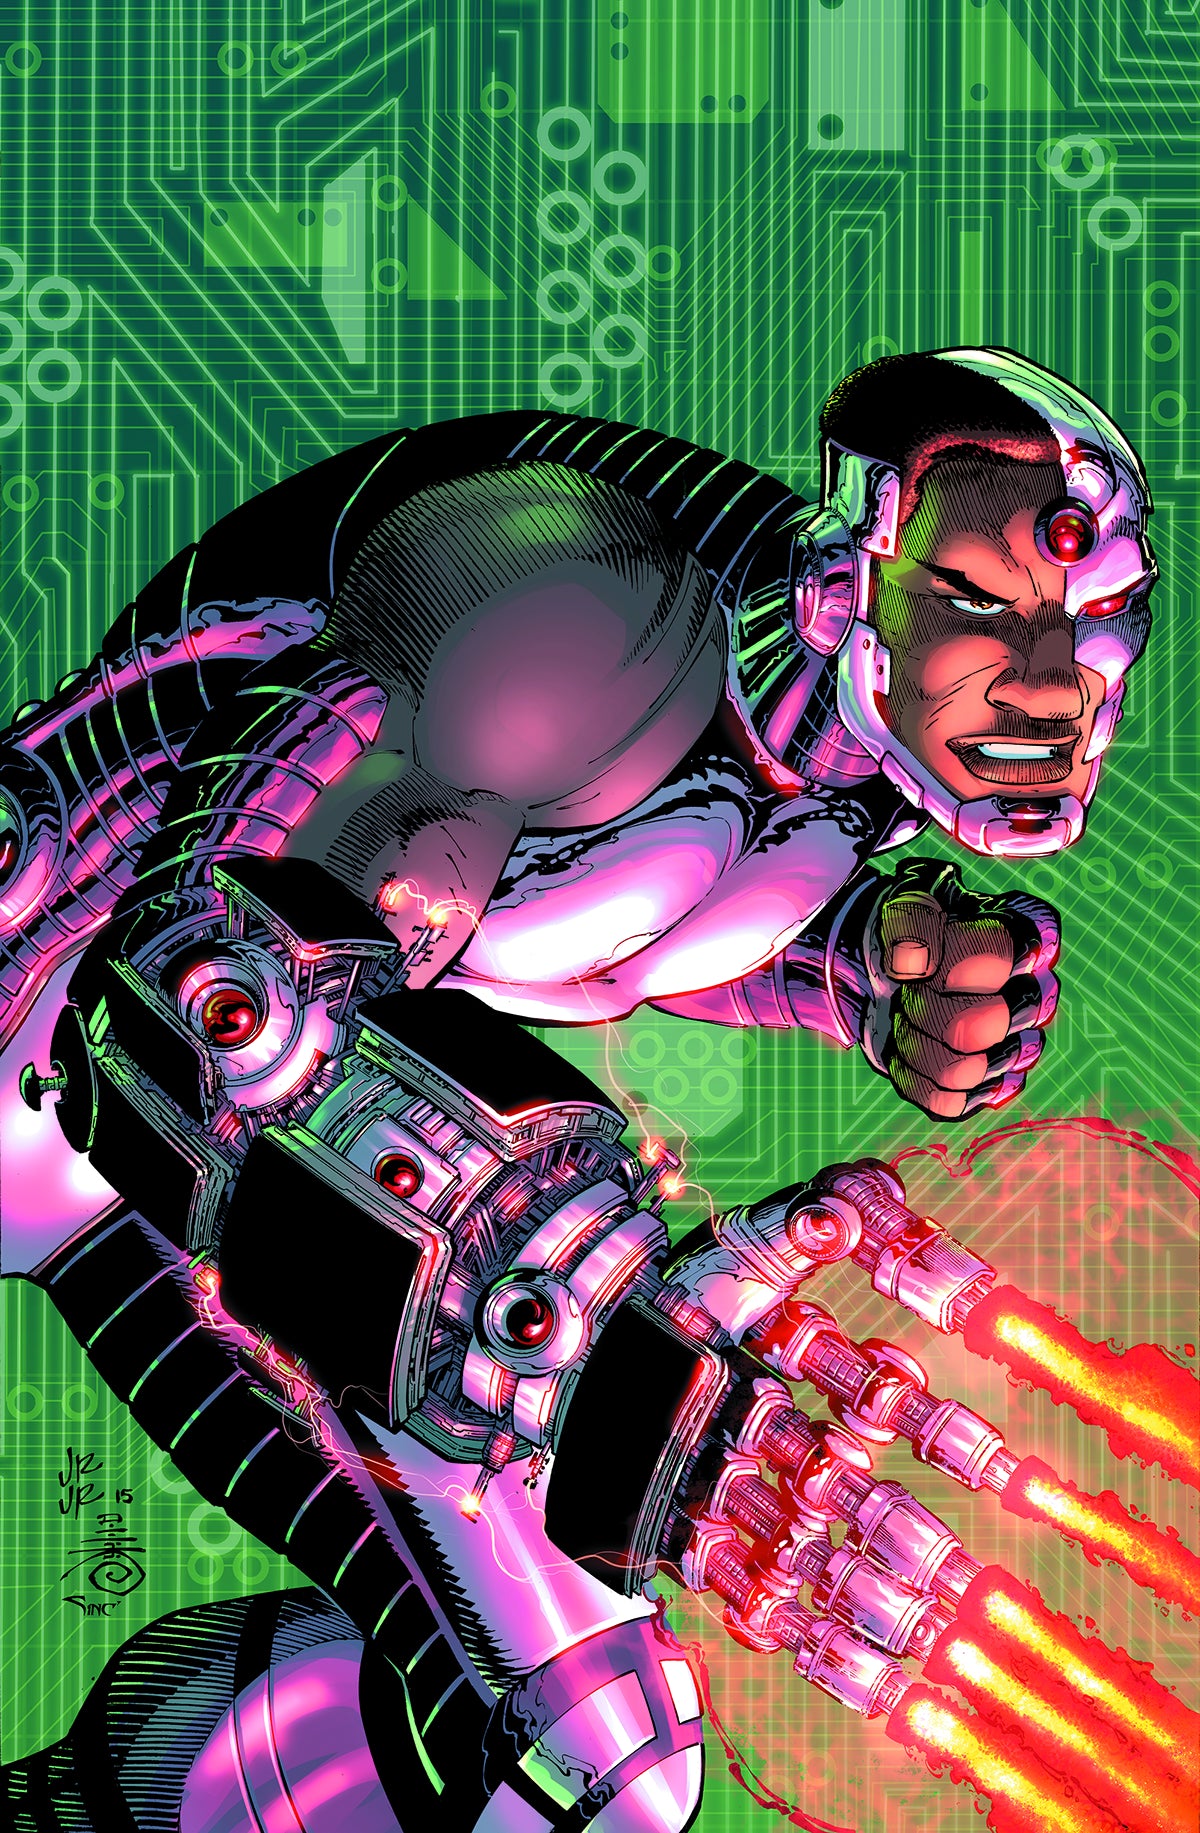 Cyborg Vol. 02 Enemy of the State